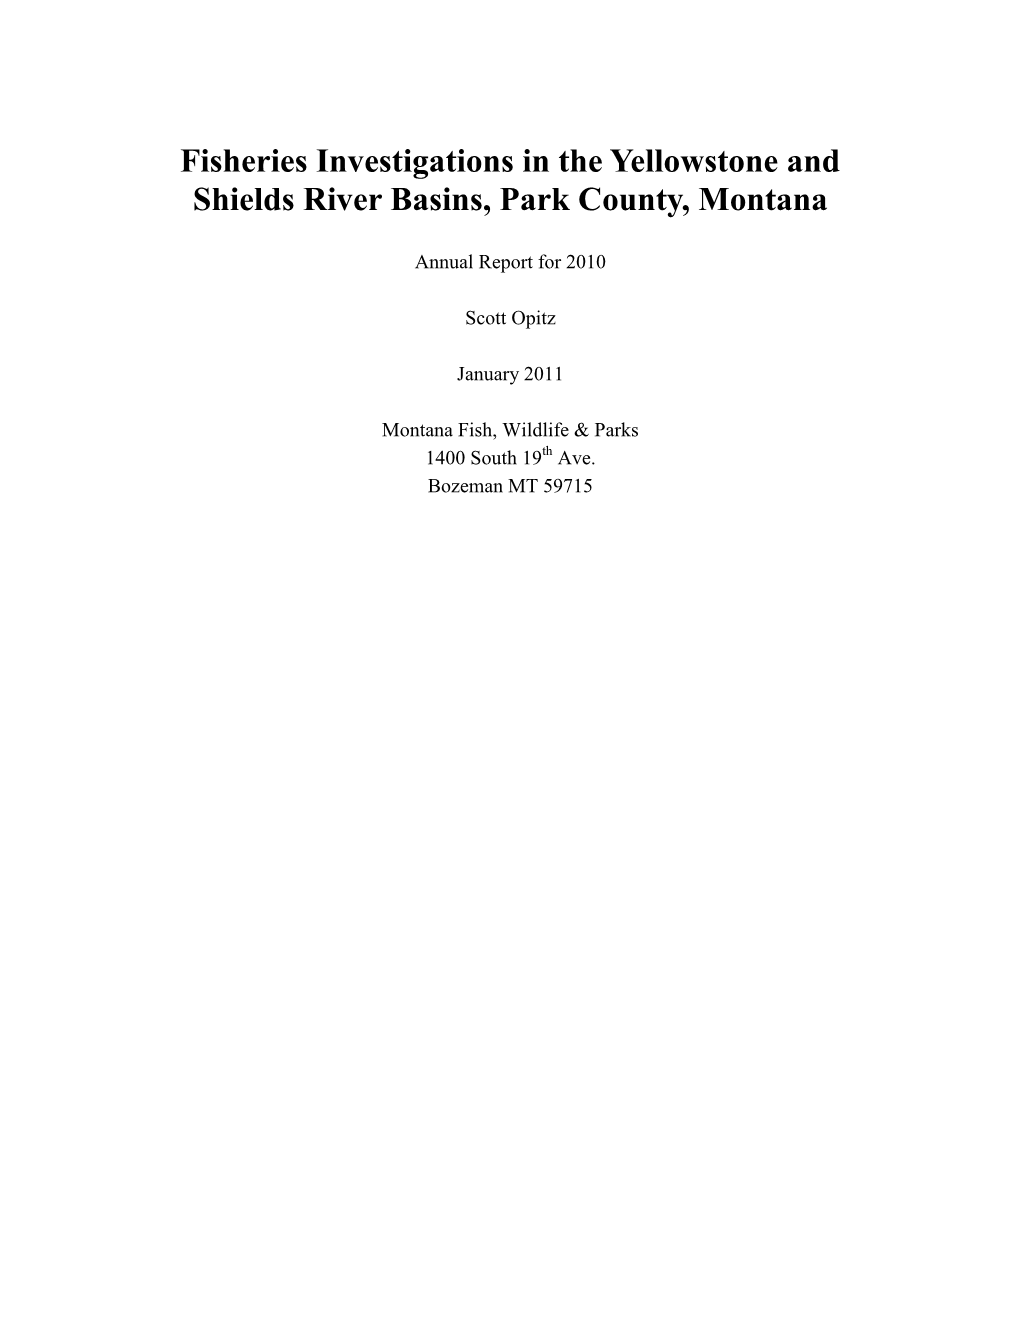 Fisheries Investigations in the Yellowstone and Shields River Basins, Park County, Montana